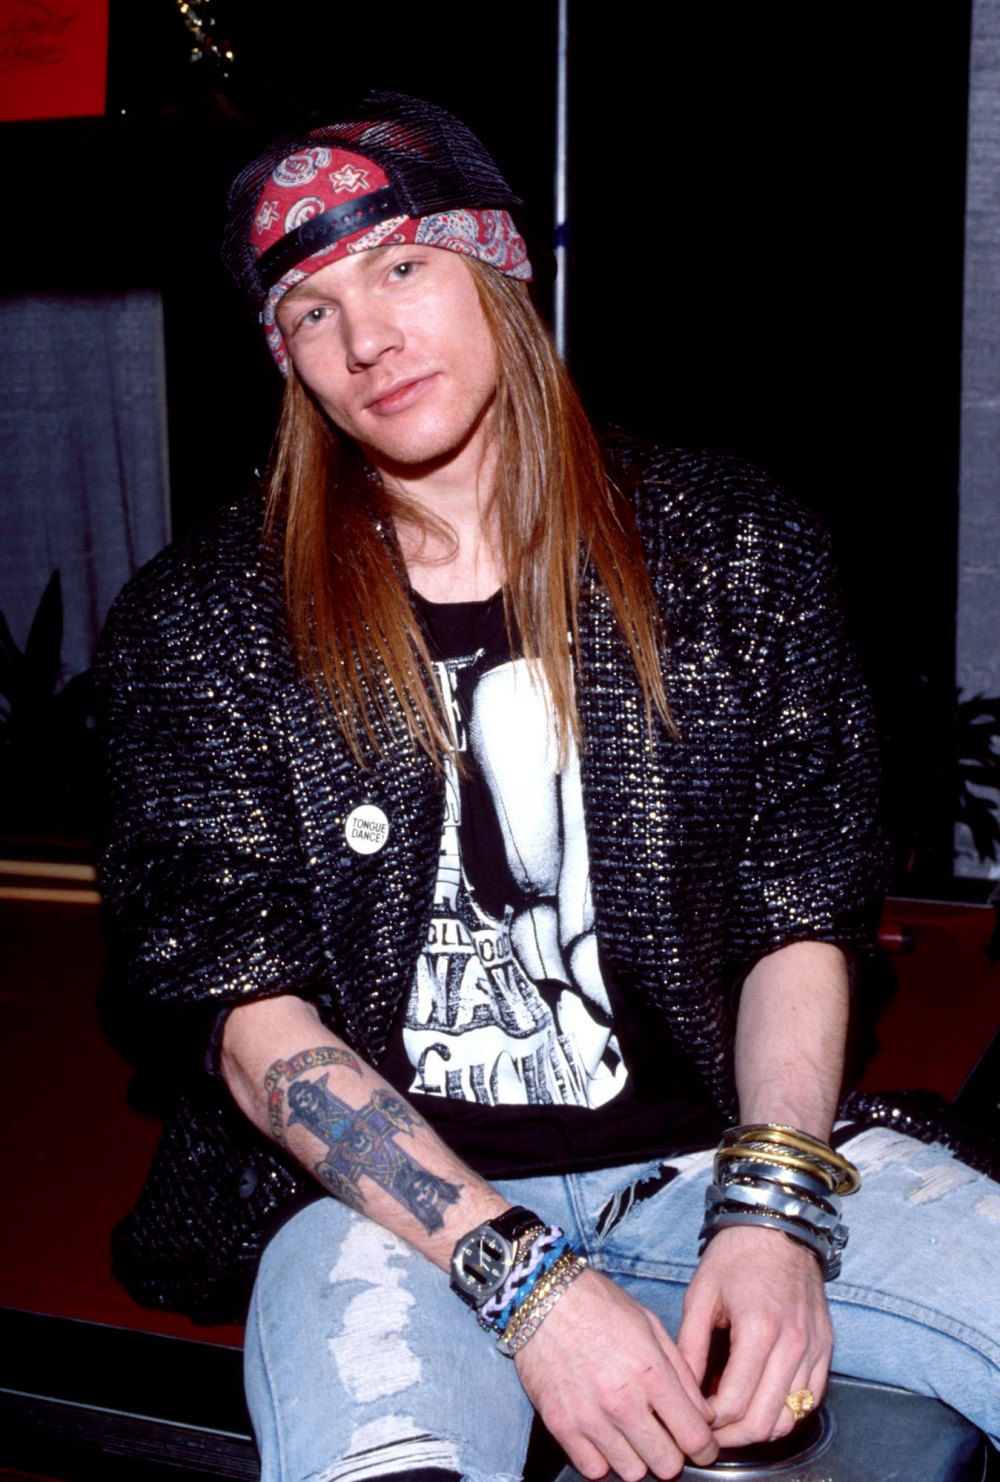 Guns N Roses Frontman Axl Rose Accused of Sexual Assault From 1989